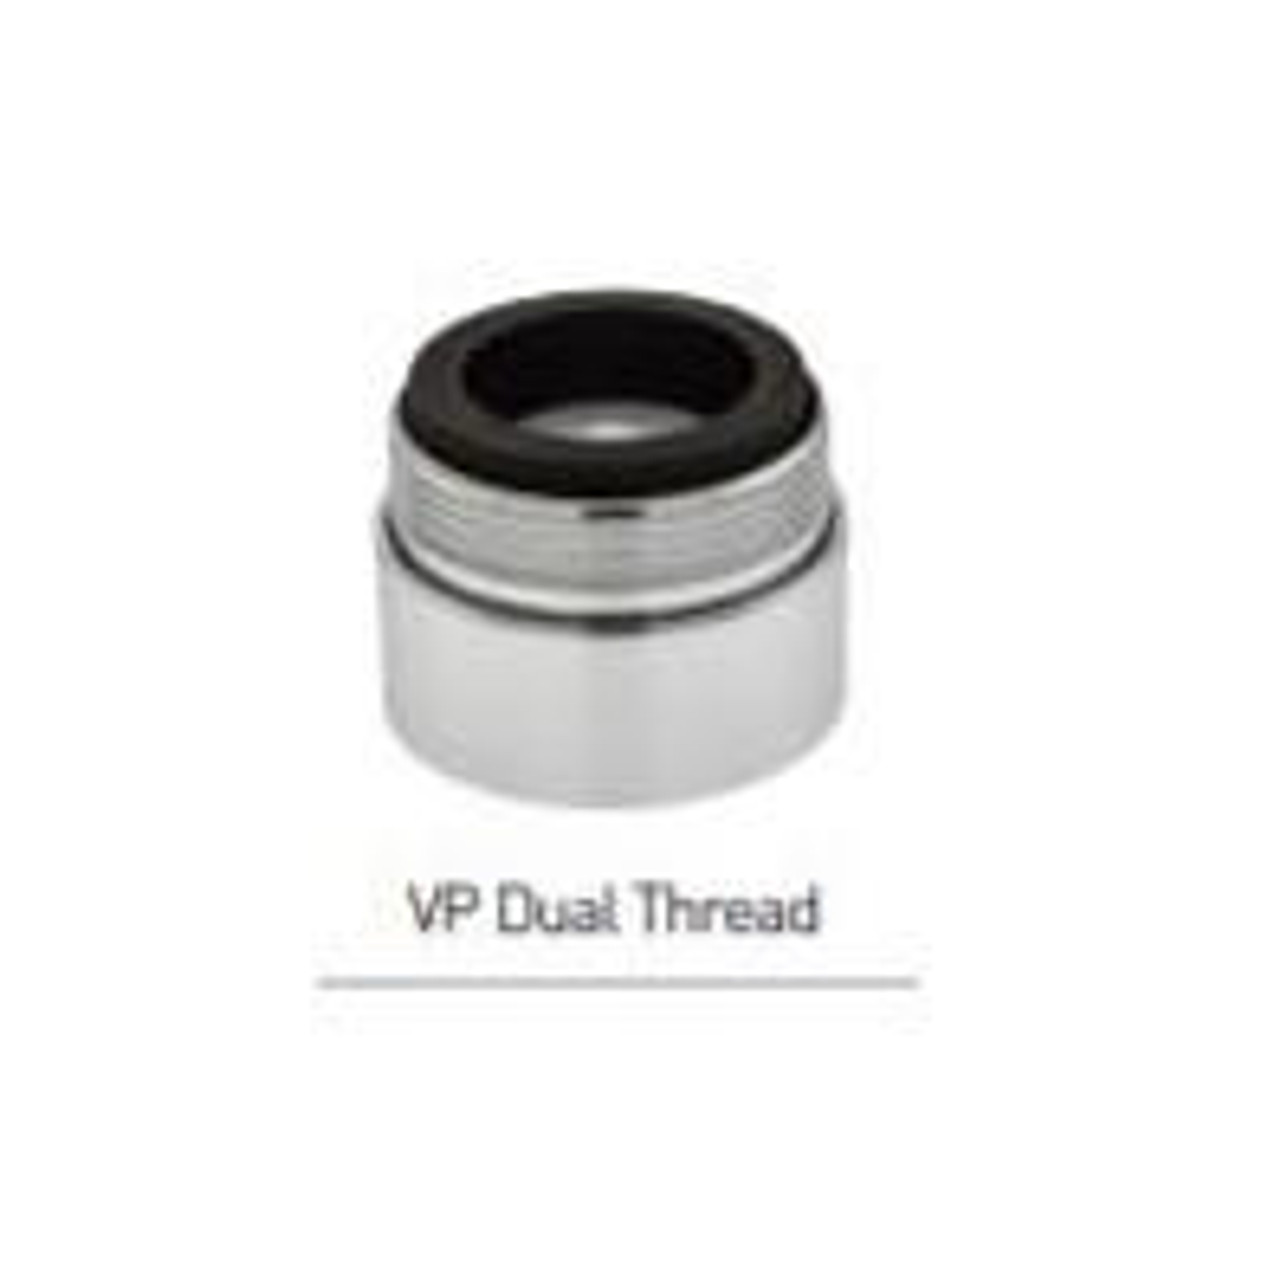 Neoperl 1.5 GPM PCA Cascade Dual Thread Vandal Proof Bubble